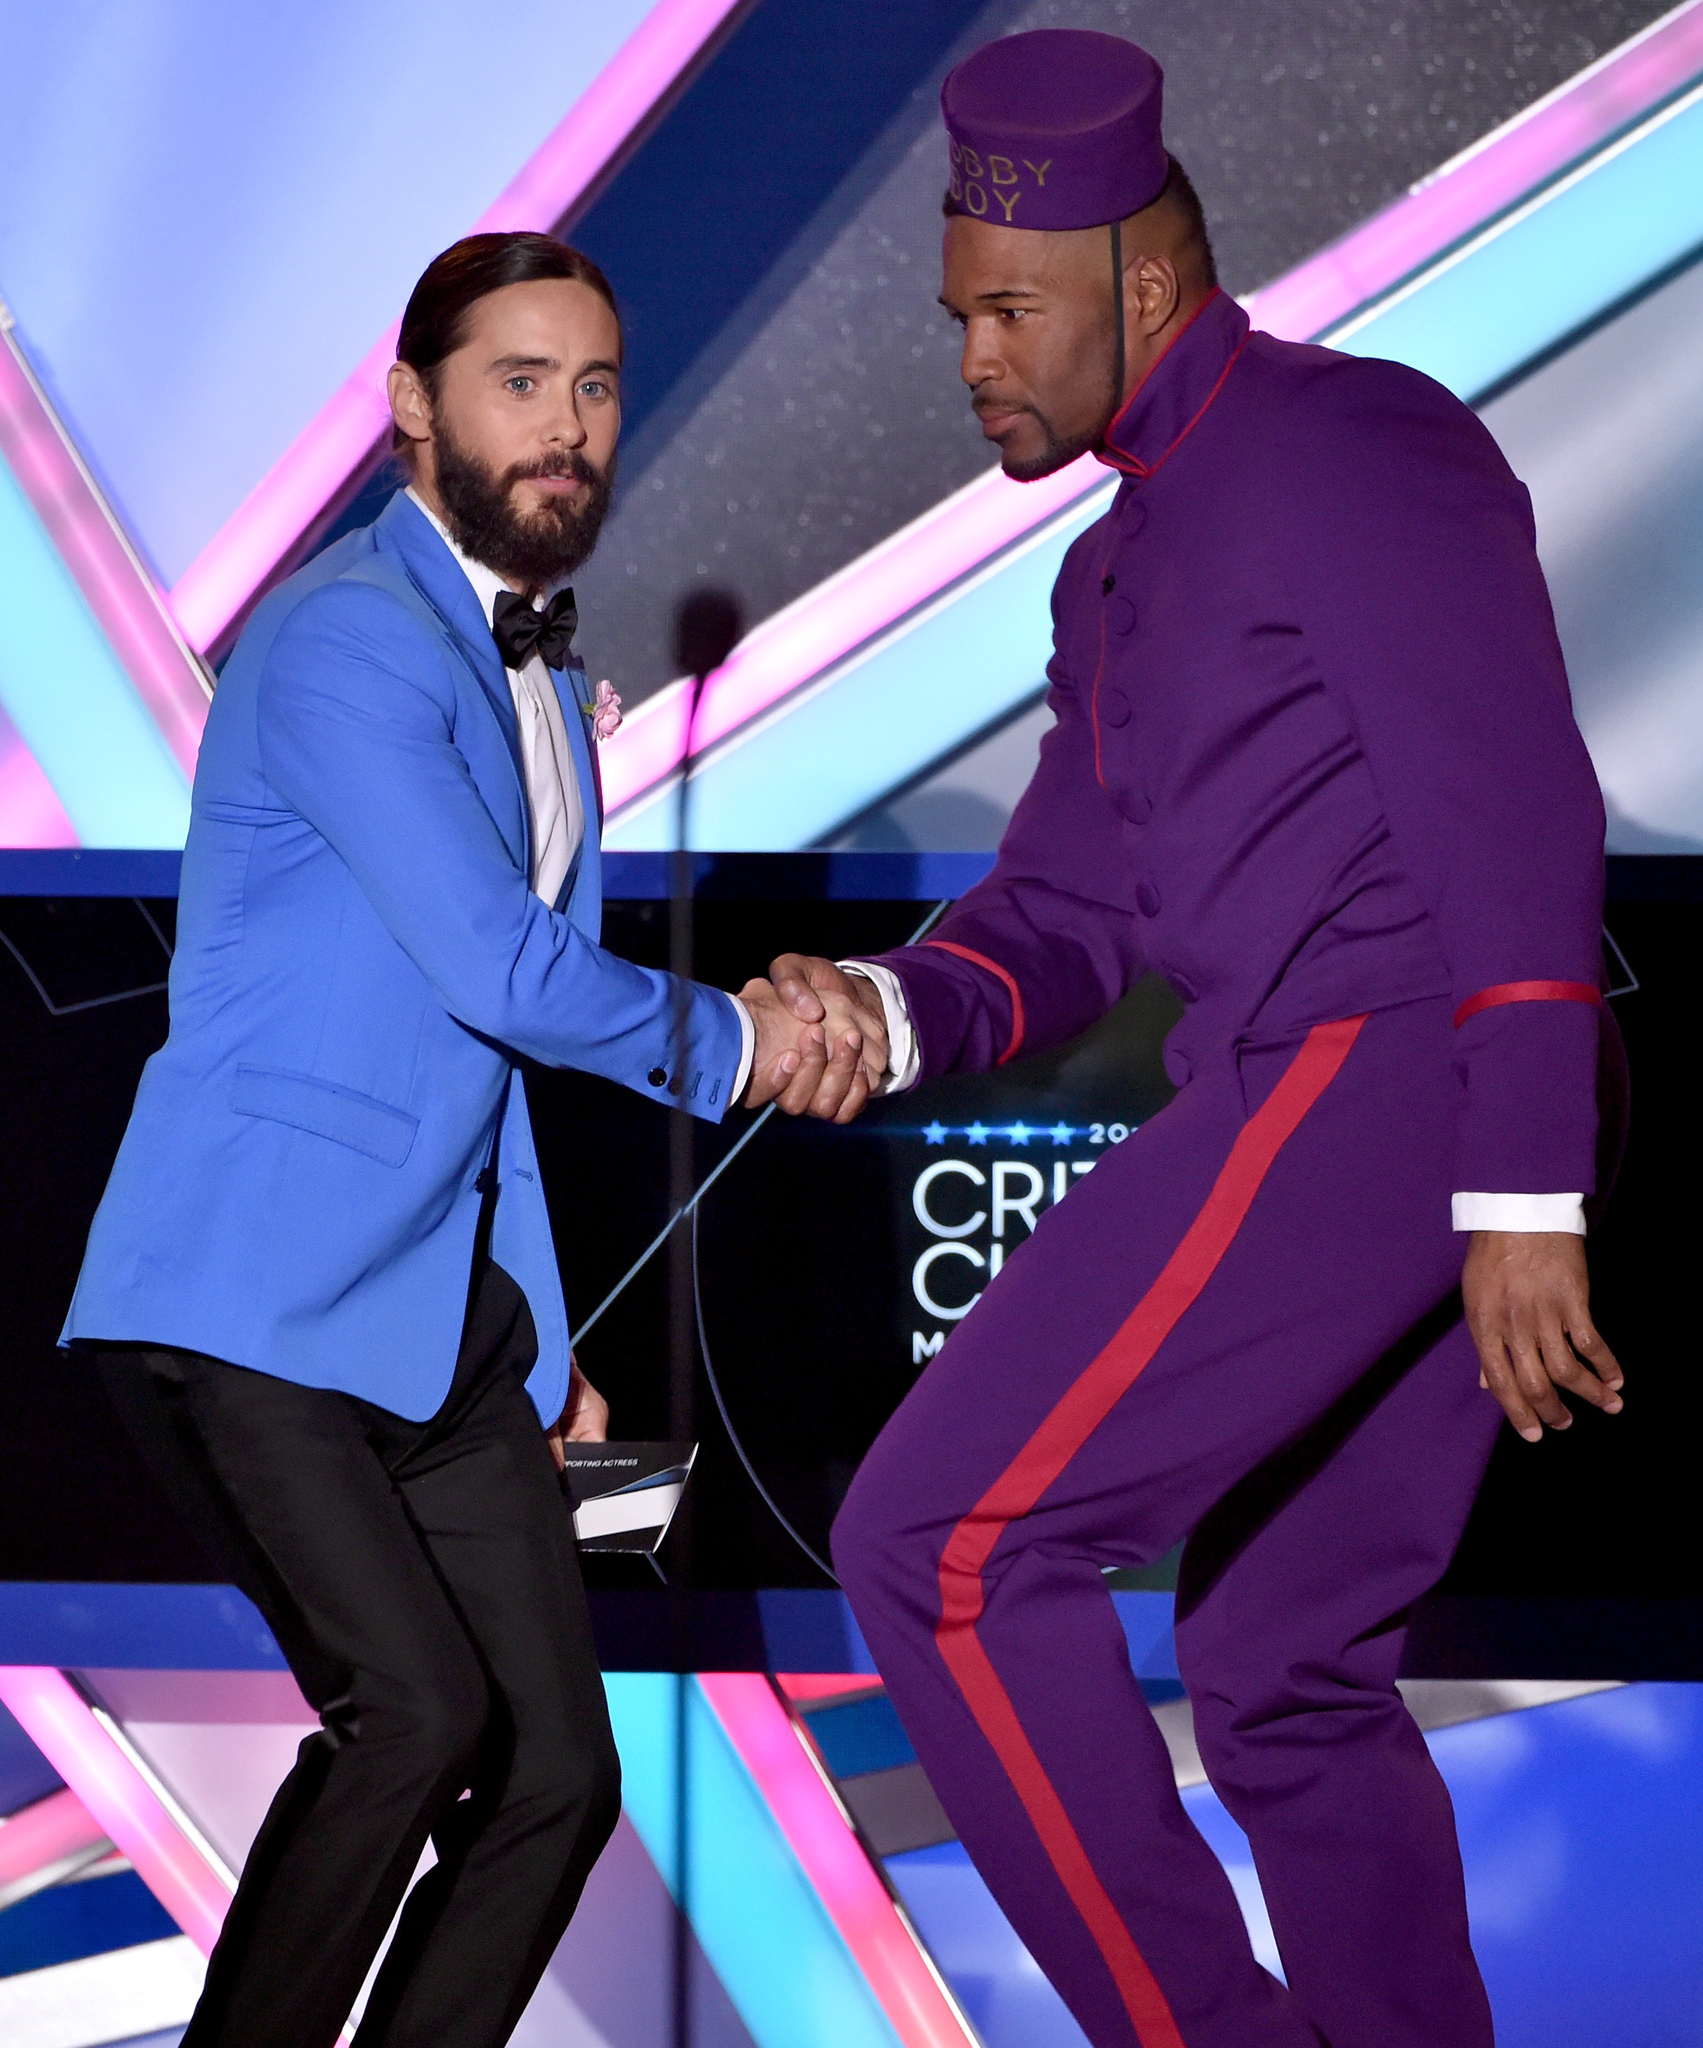 Jared Leto and Michael Strahan